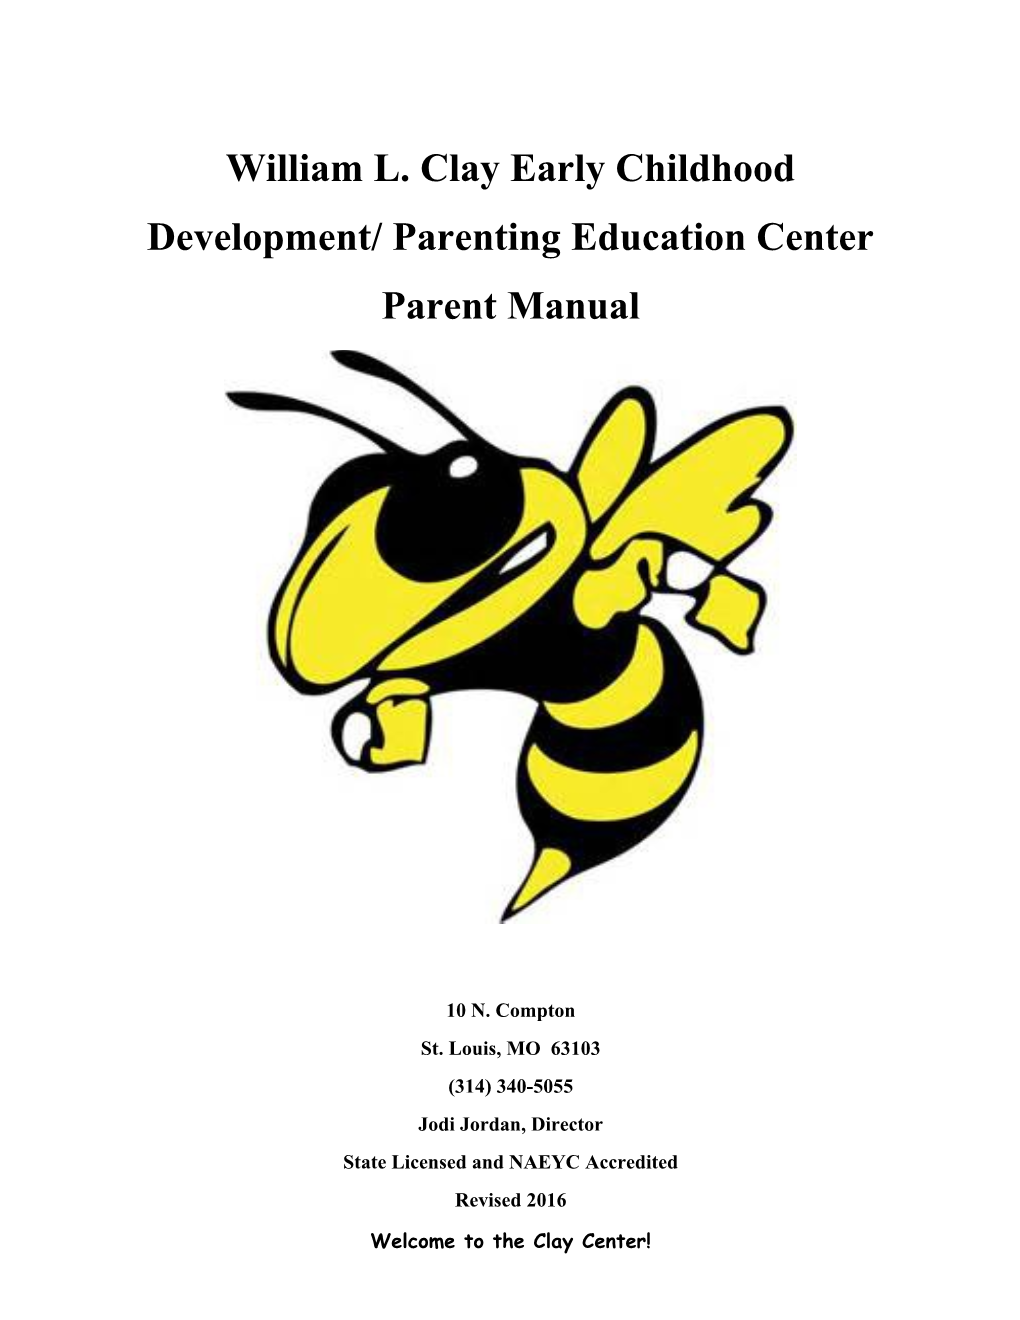 William L. Clay Early Childhood Development/ Parenting Educationcenter